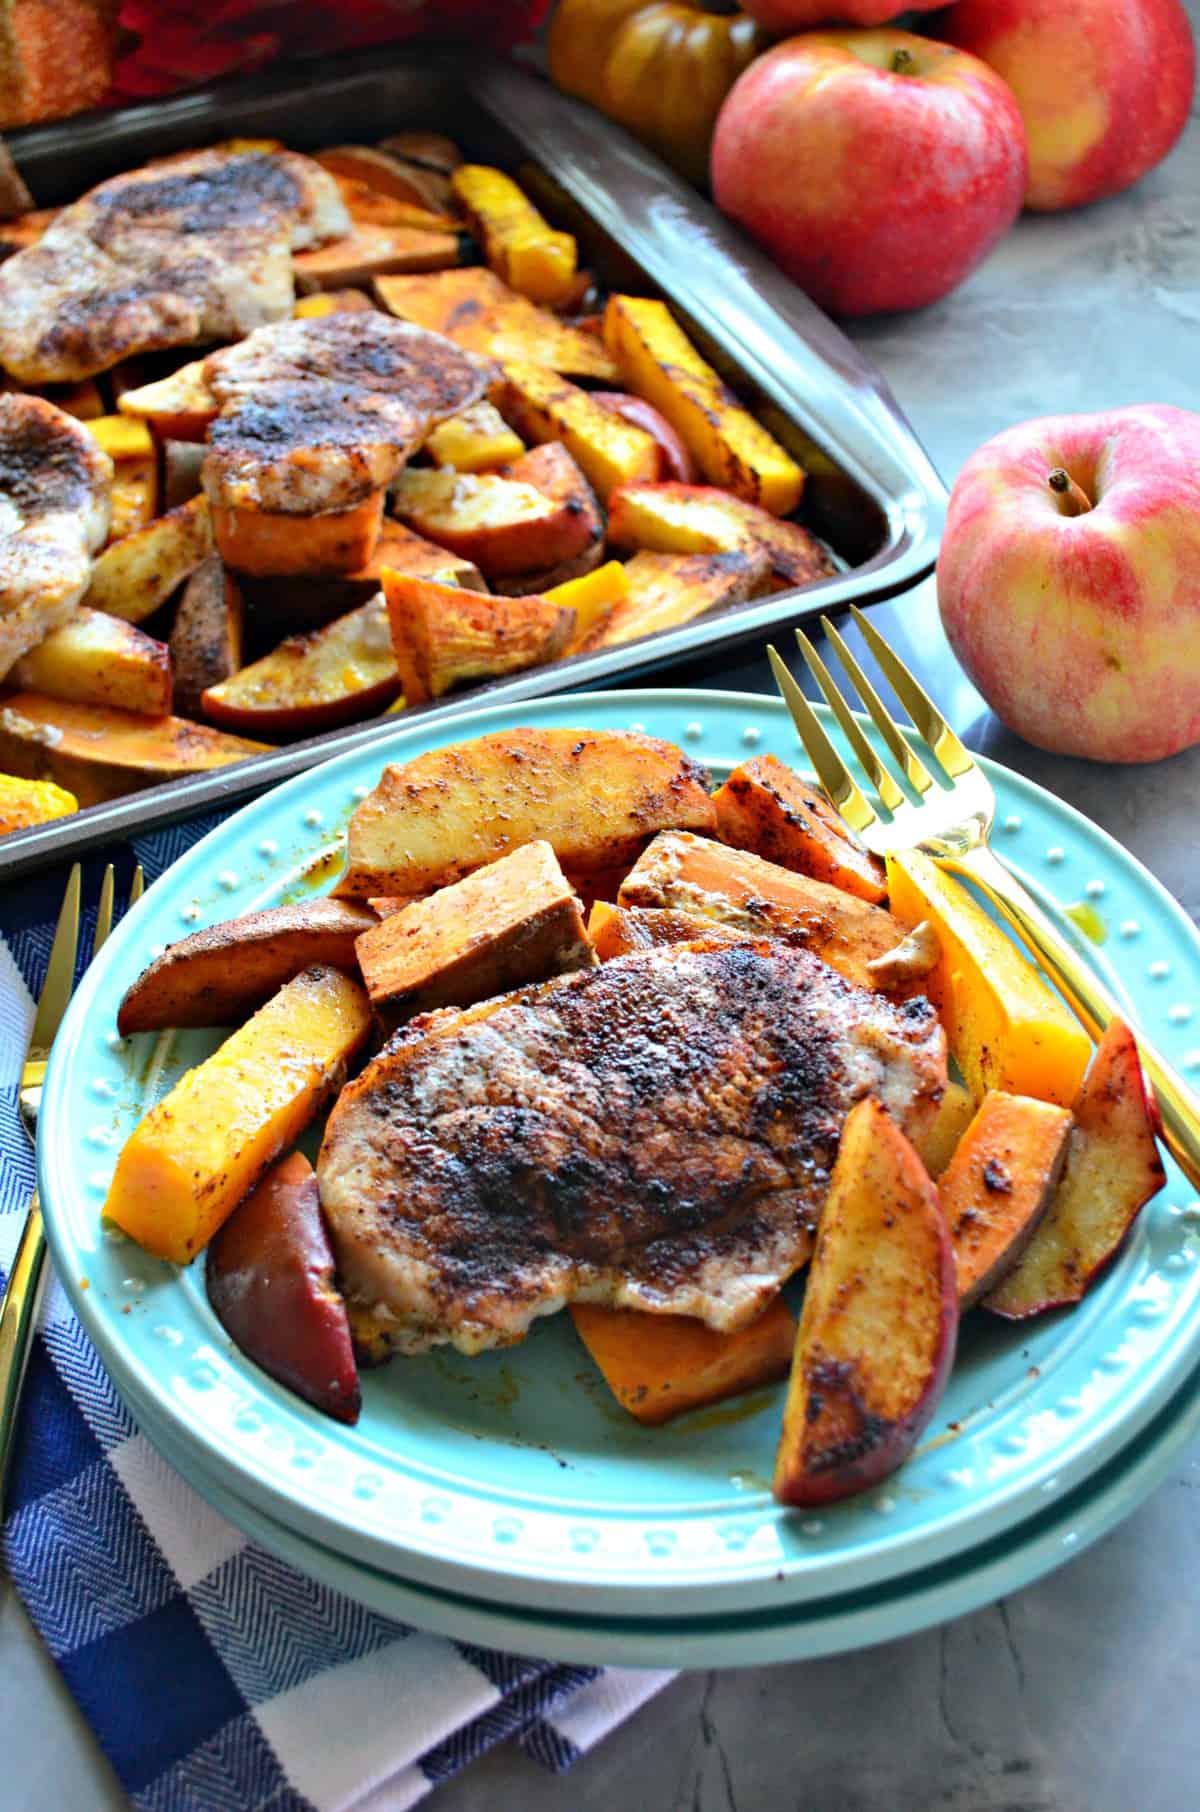 plated seasoned pork chops, sliced apples, and sliced butternut squash next to sheetpan of more.